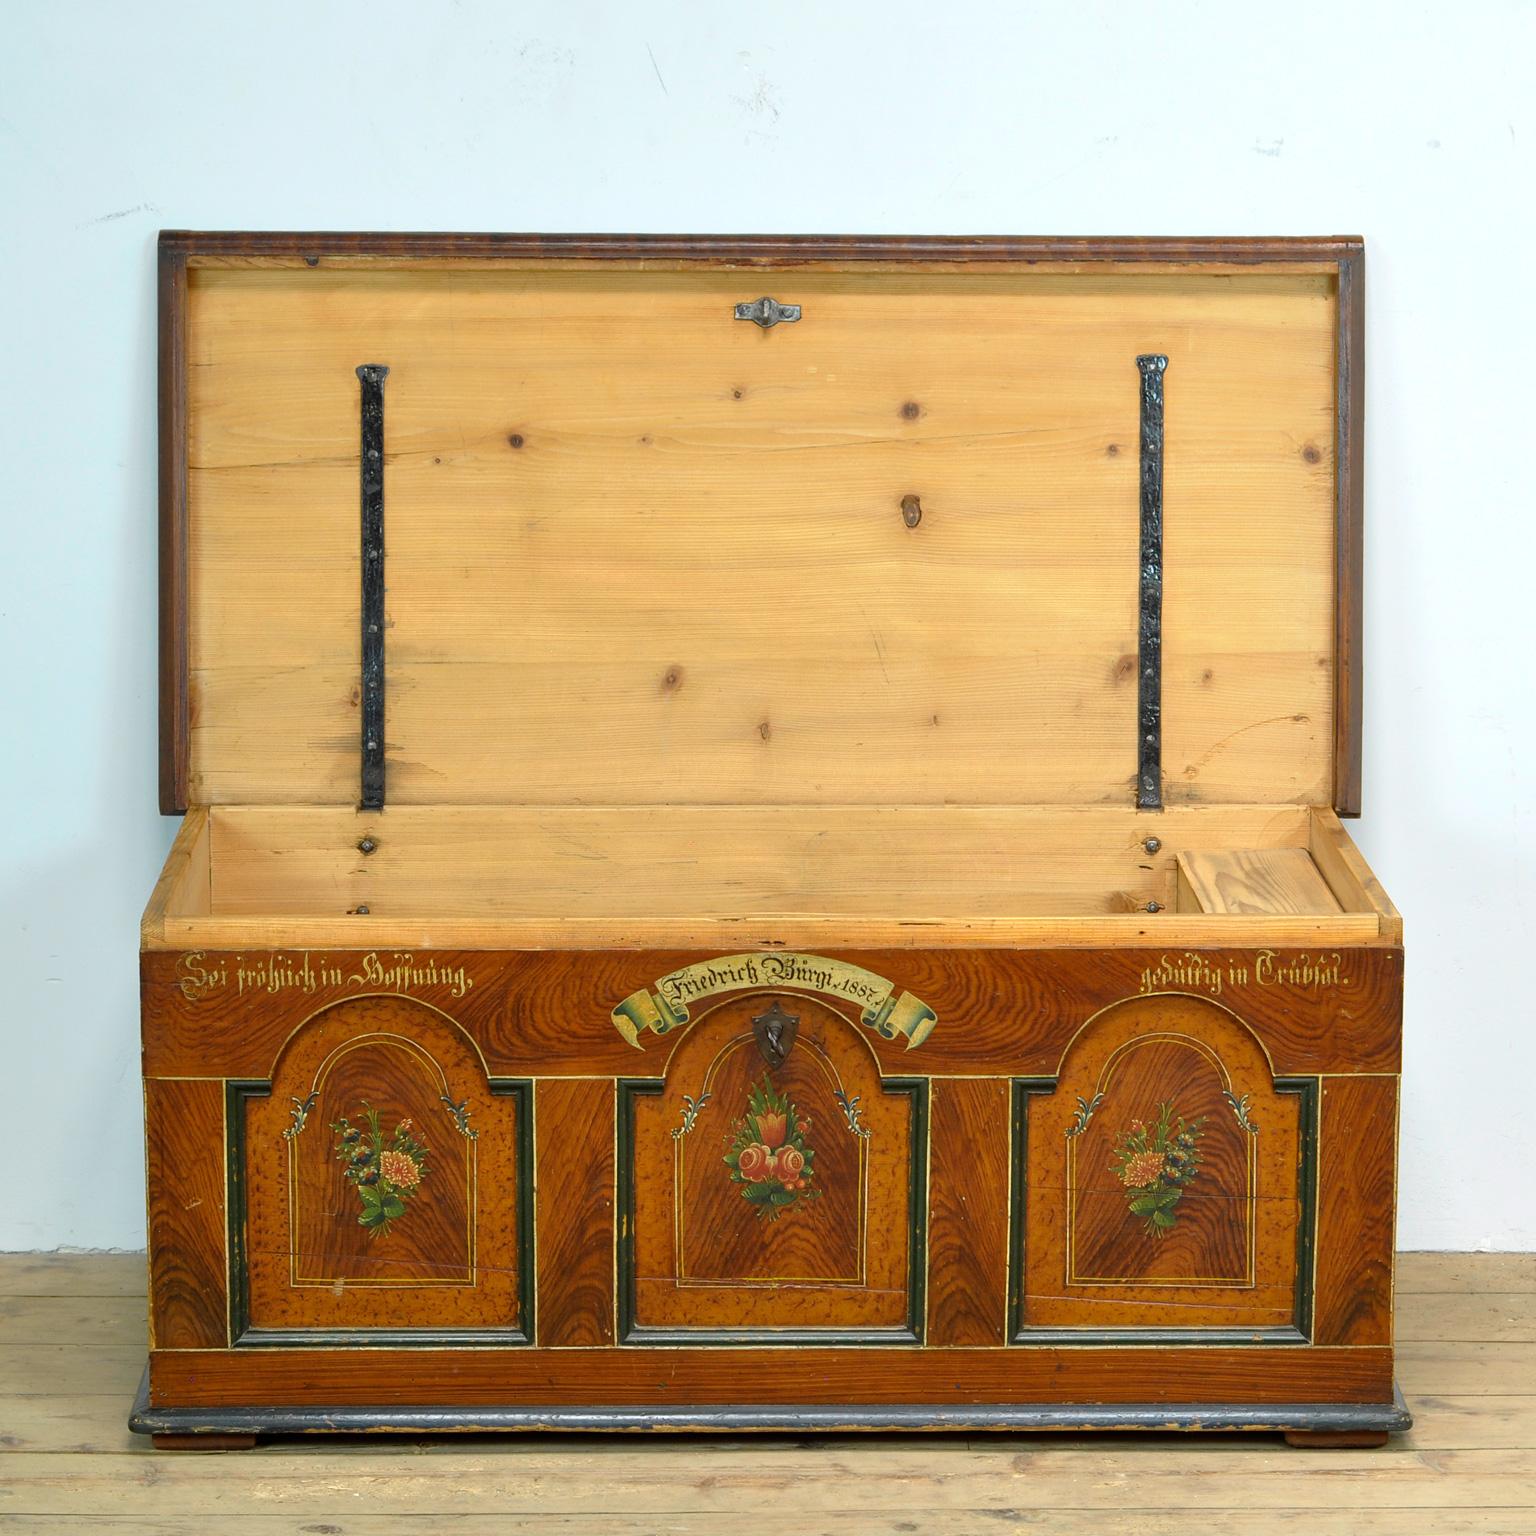 Hand-Painted Wedding Chest From 1887